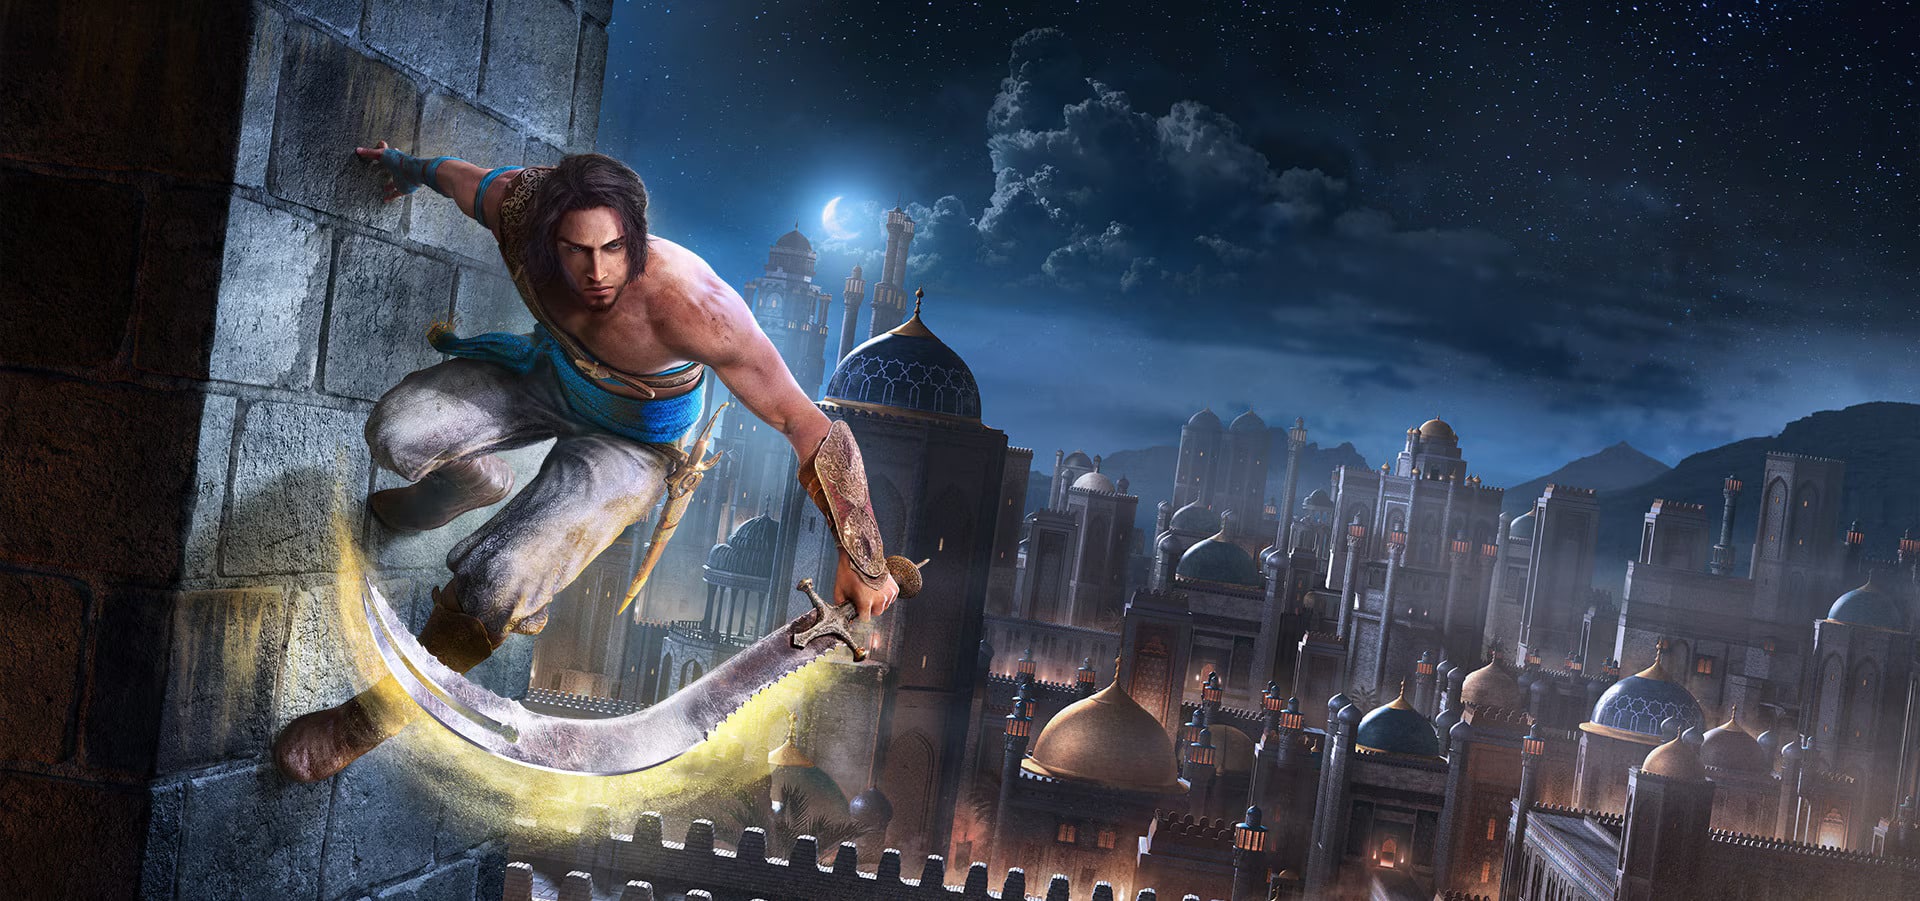 Prince of Persia: The Sands of Time Remake Enhances Farah as a Great Character